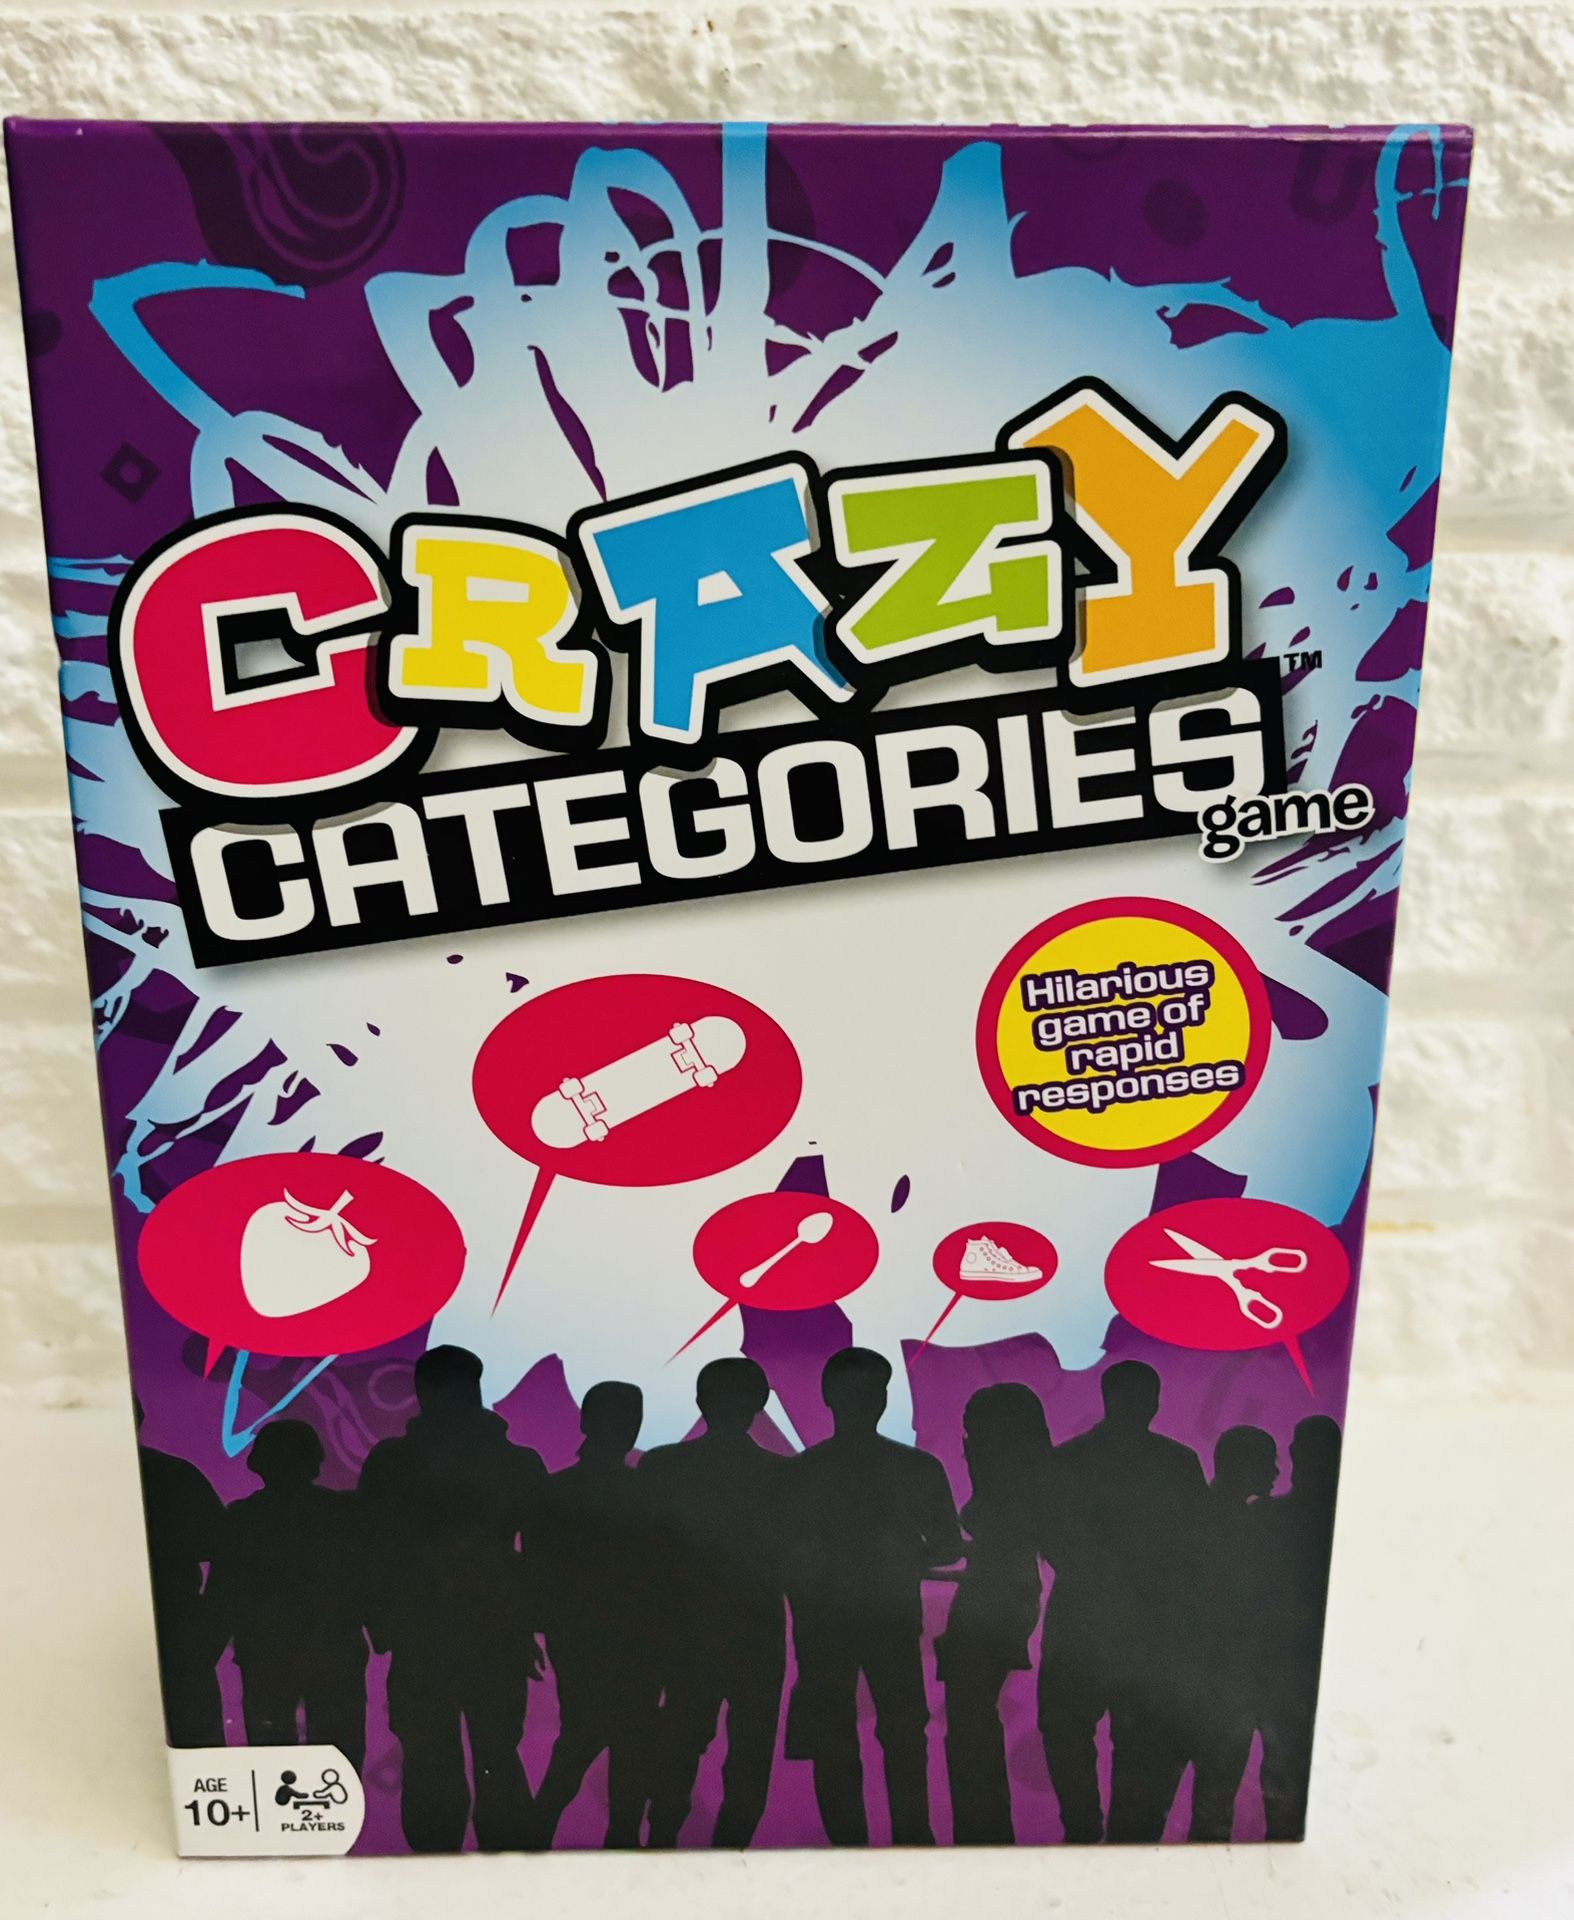 Crazy Categories Board Game Hilarious Game of Responses